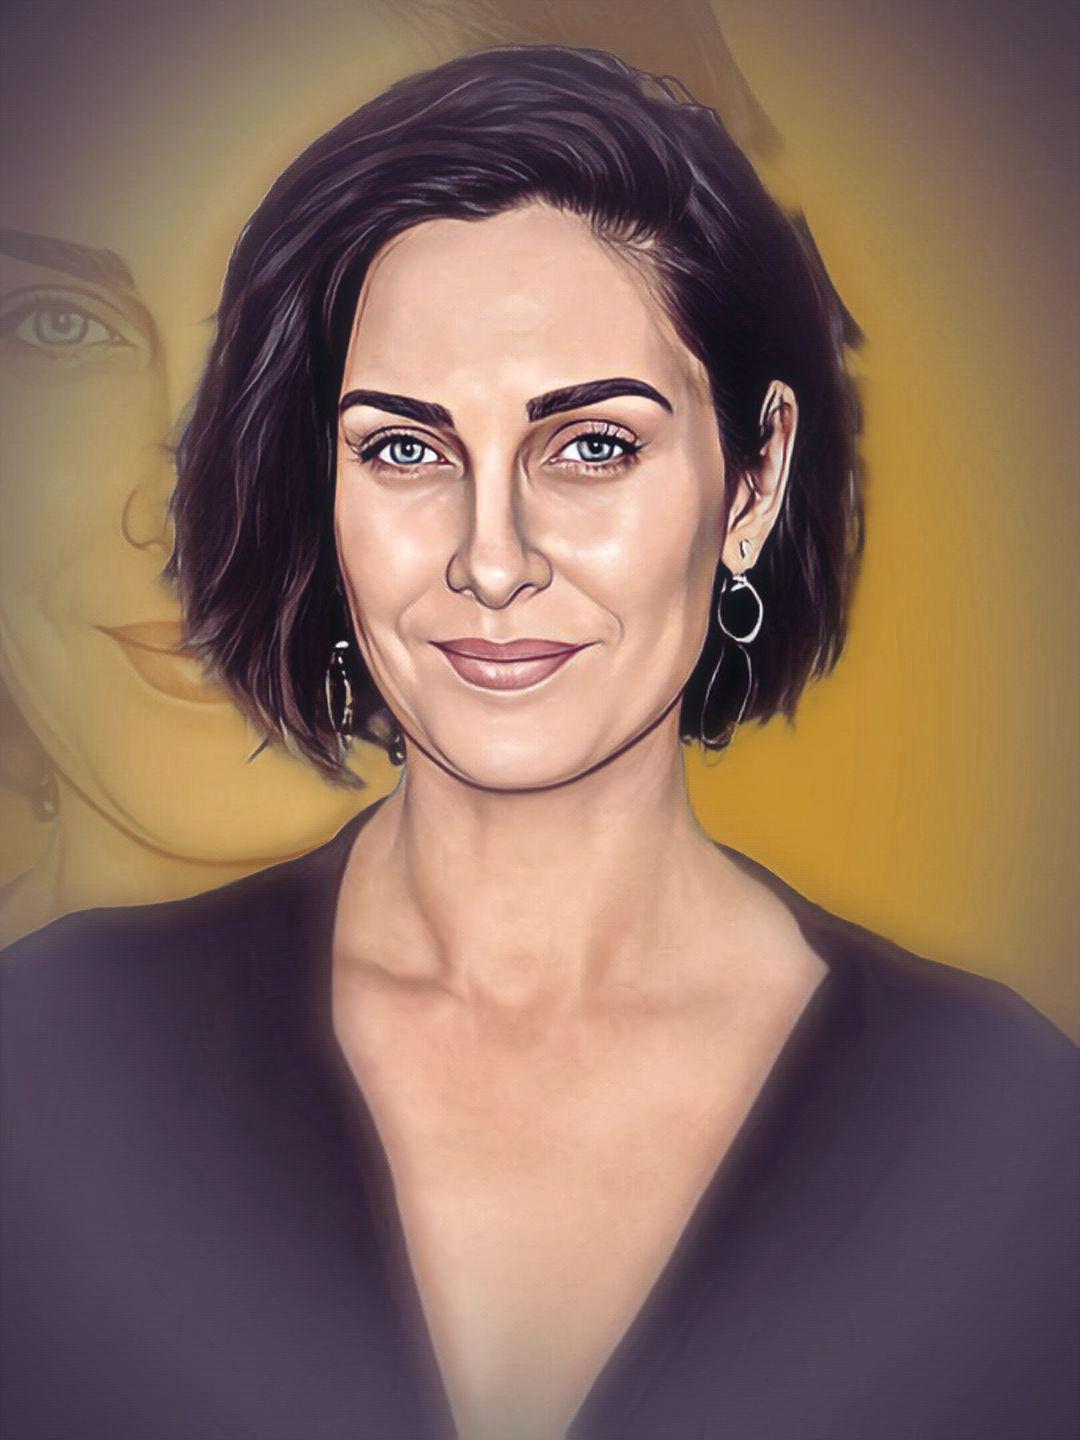 Amateur Nudism Naturism - Carrie-Anne Moss - Celeb ART - Beautiful Artworks of Celebrities,  Footballers, Politicians and Famous People in World | OpenSea